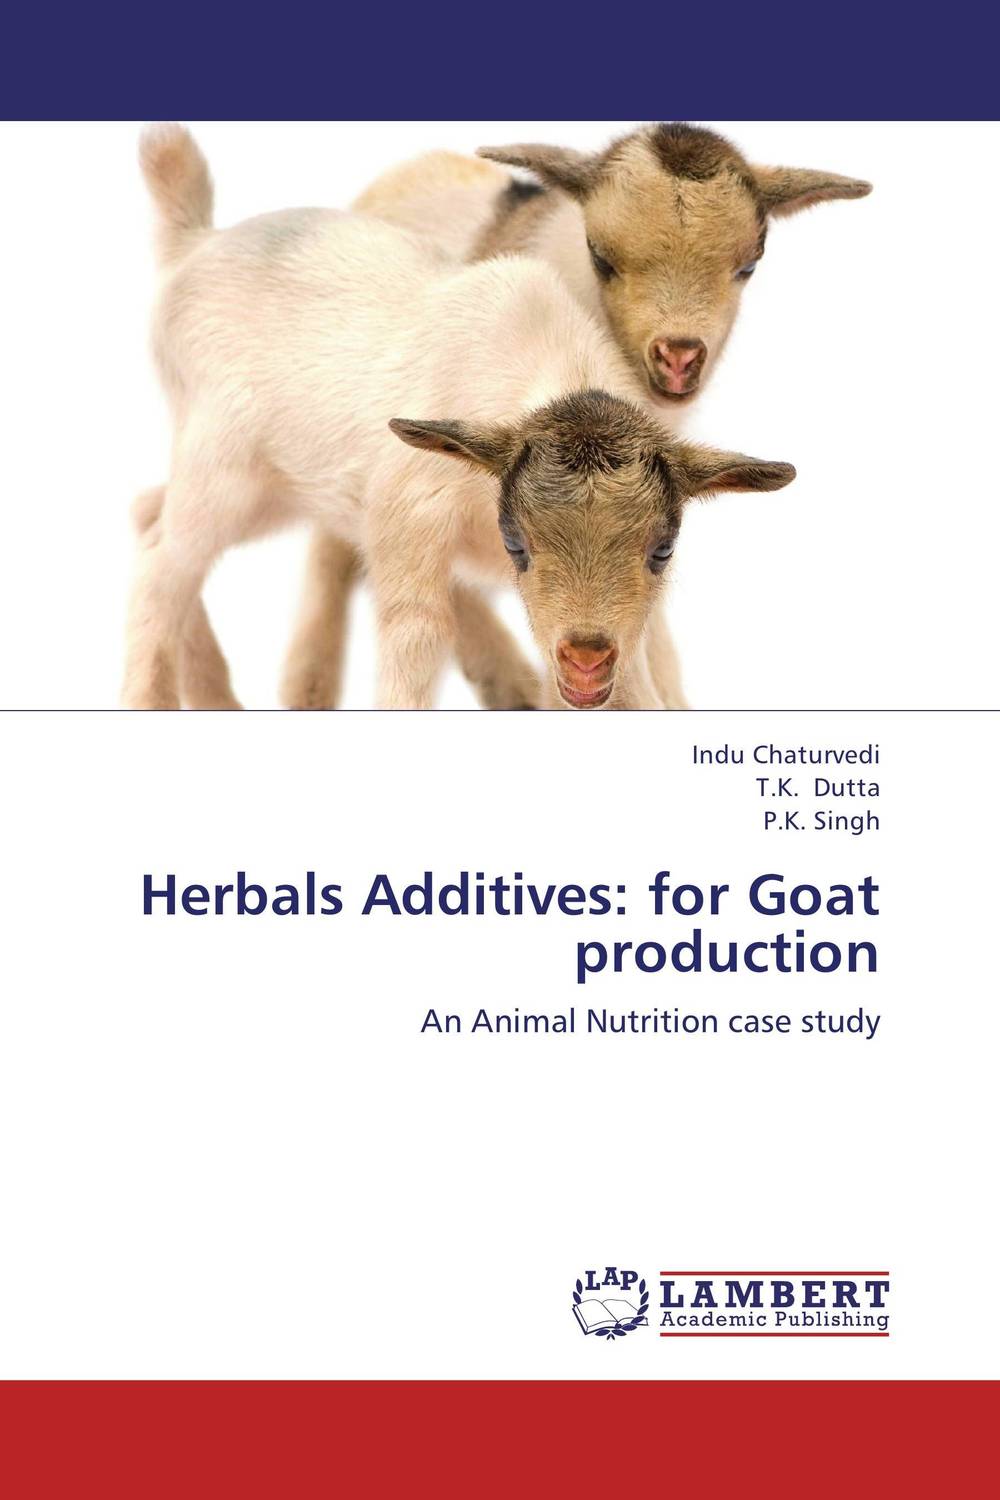 Herbals Additives: for Goat production